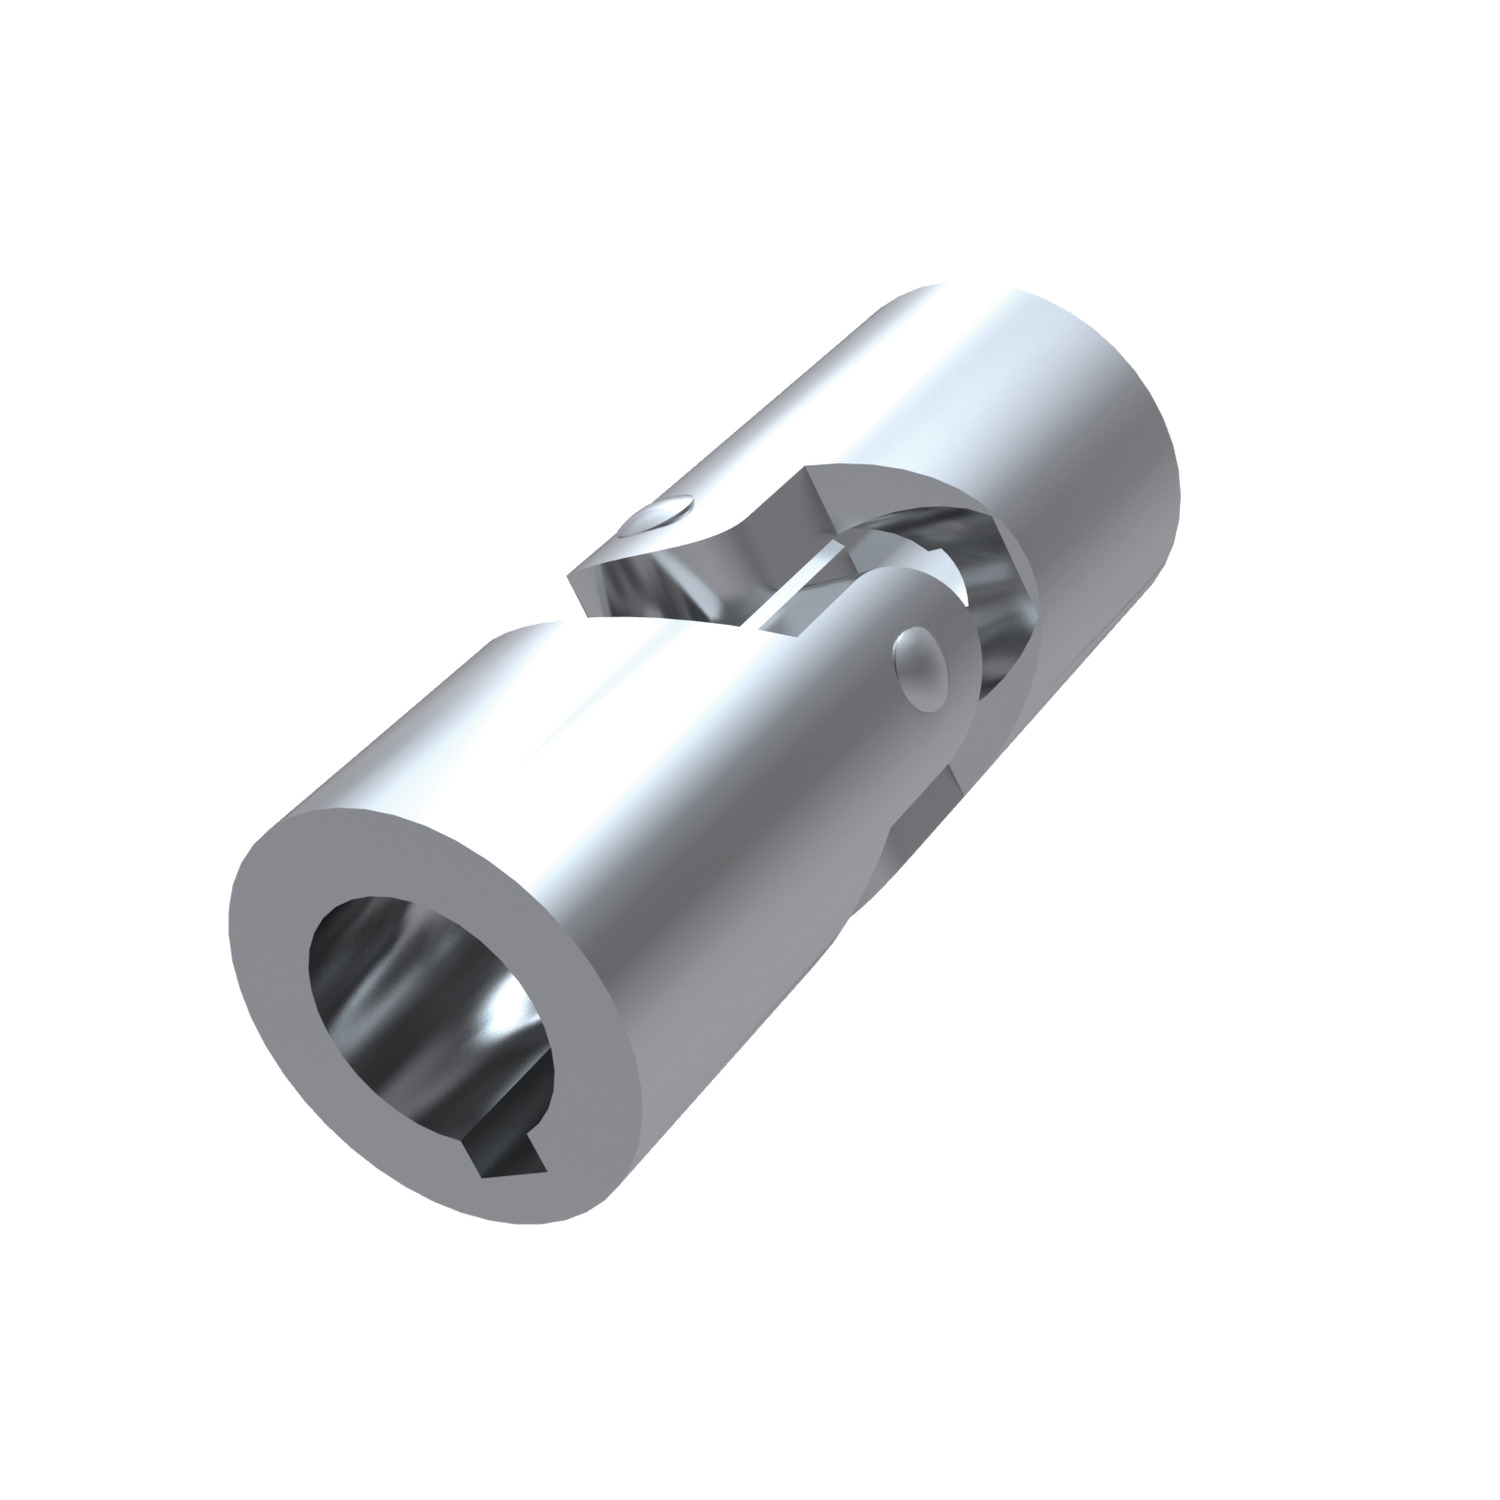 65170.W0010 Sgl Universal Joint - Free cutting St. Round Bore - 10 - 16 - 52